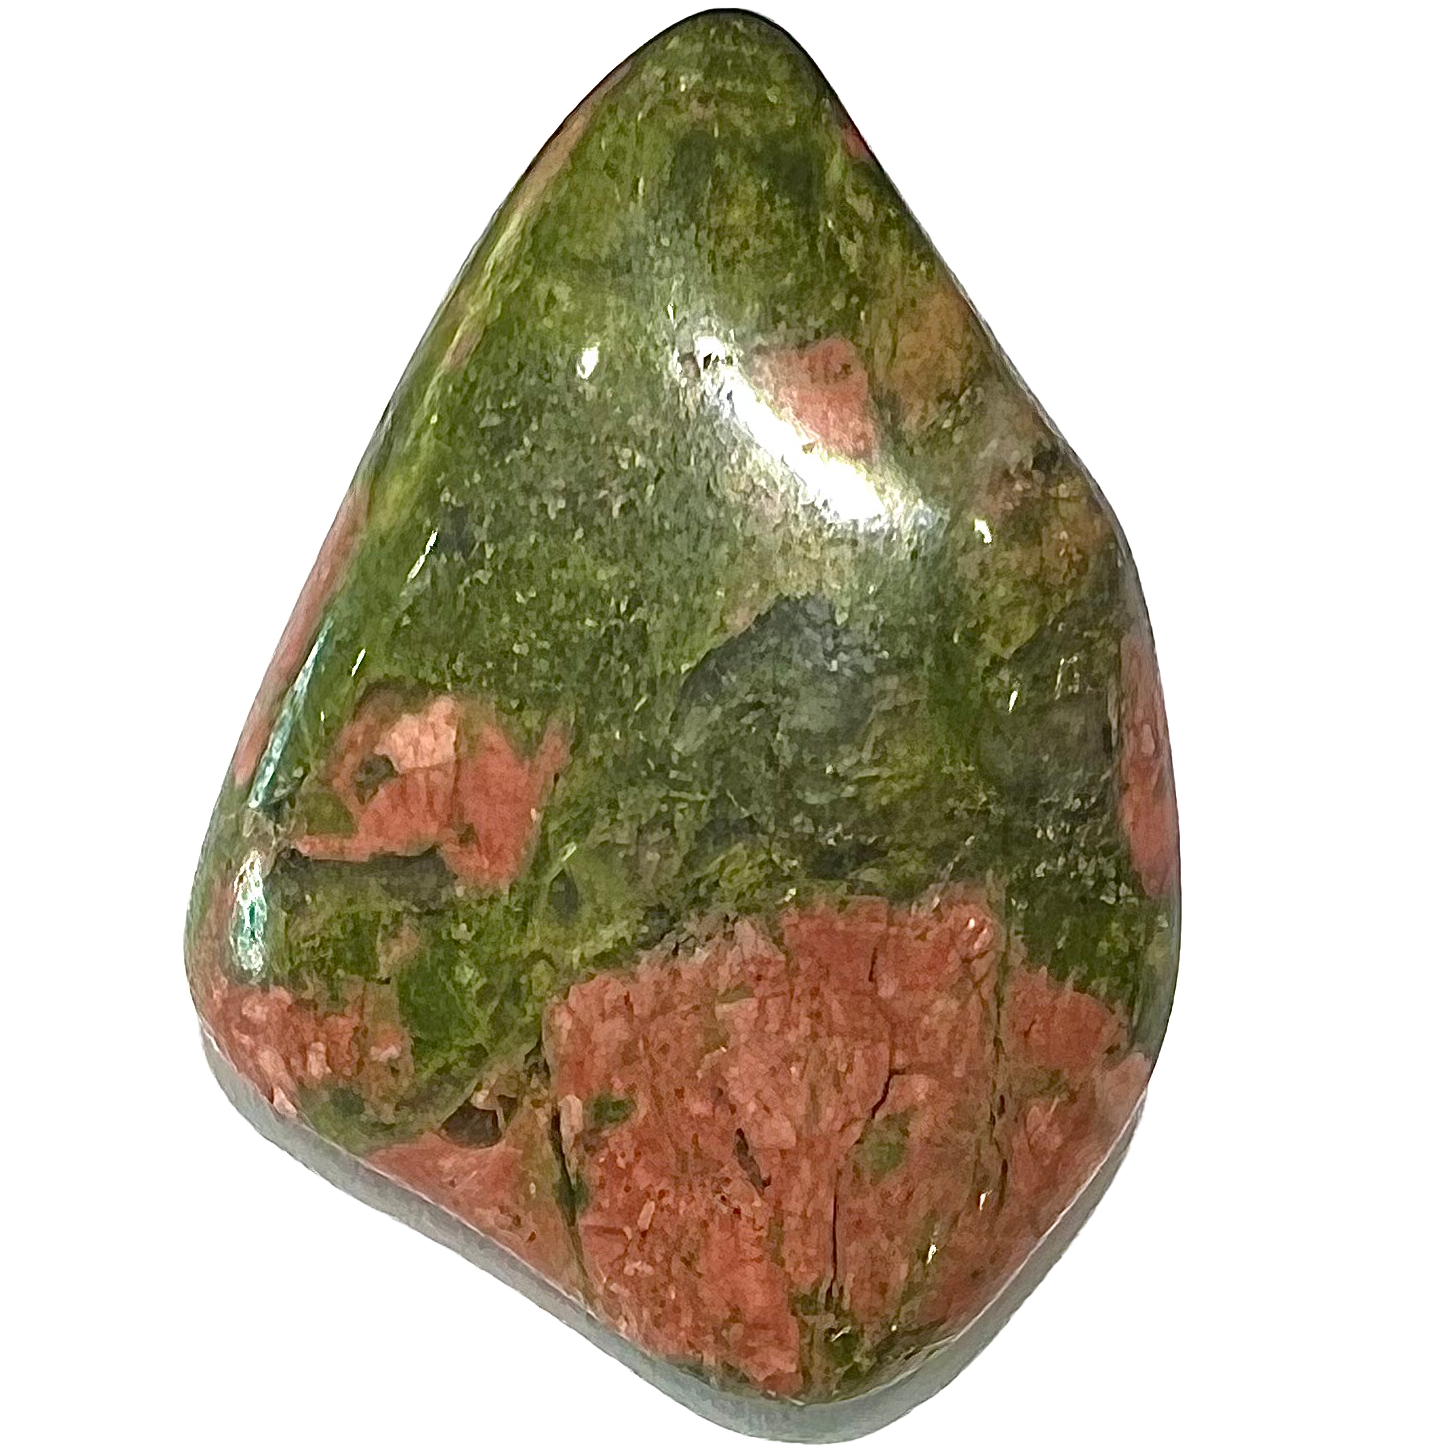 A tumble polished unakite stone.  The stone is green with brownish pink spotting.